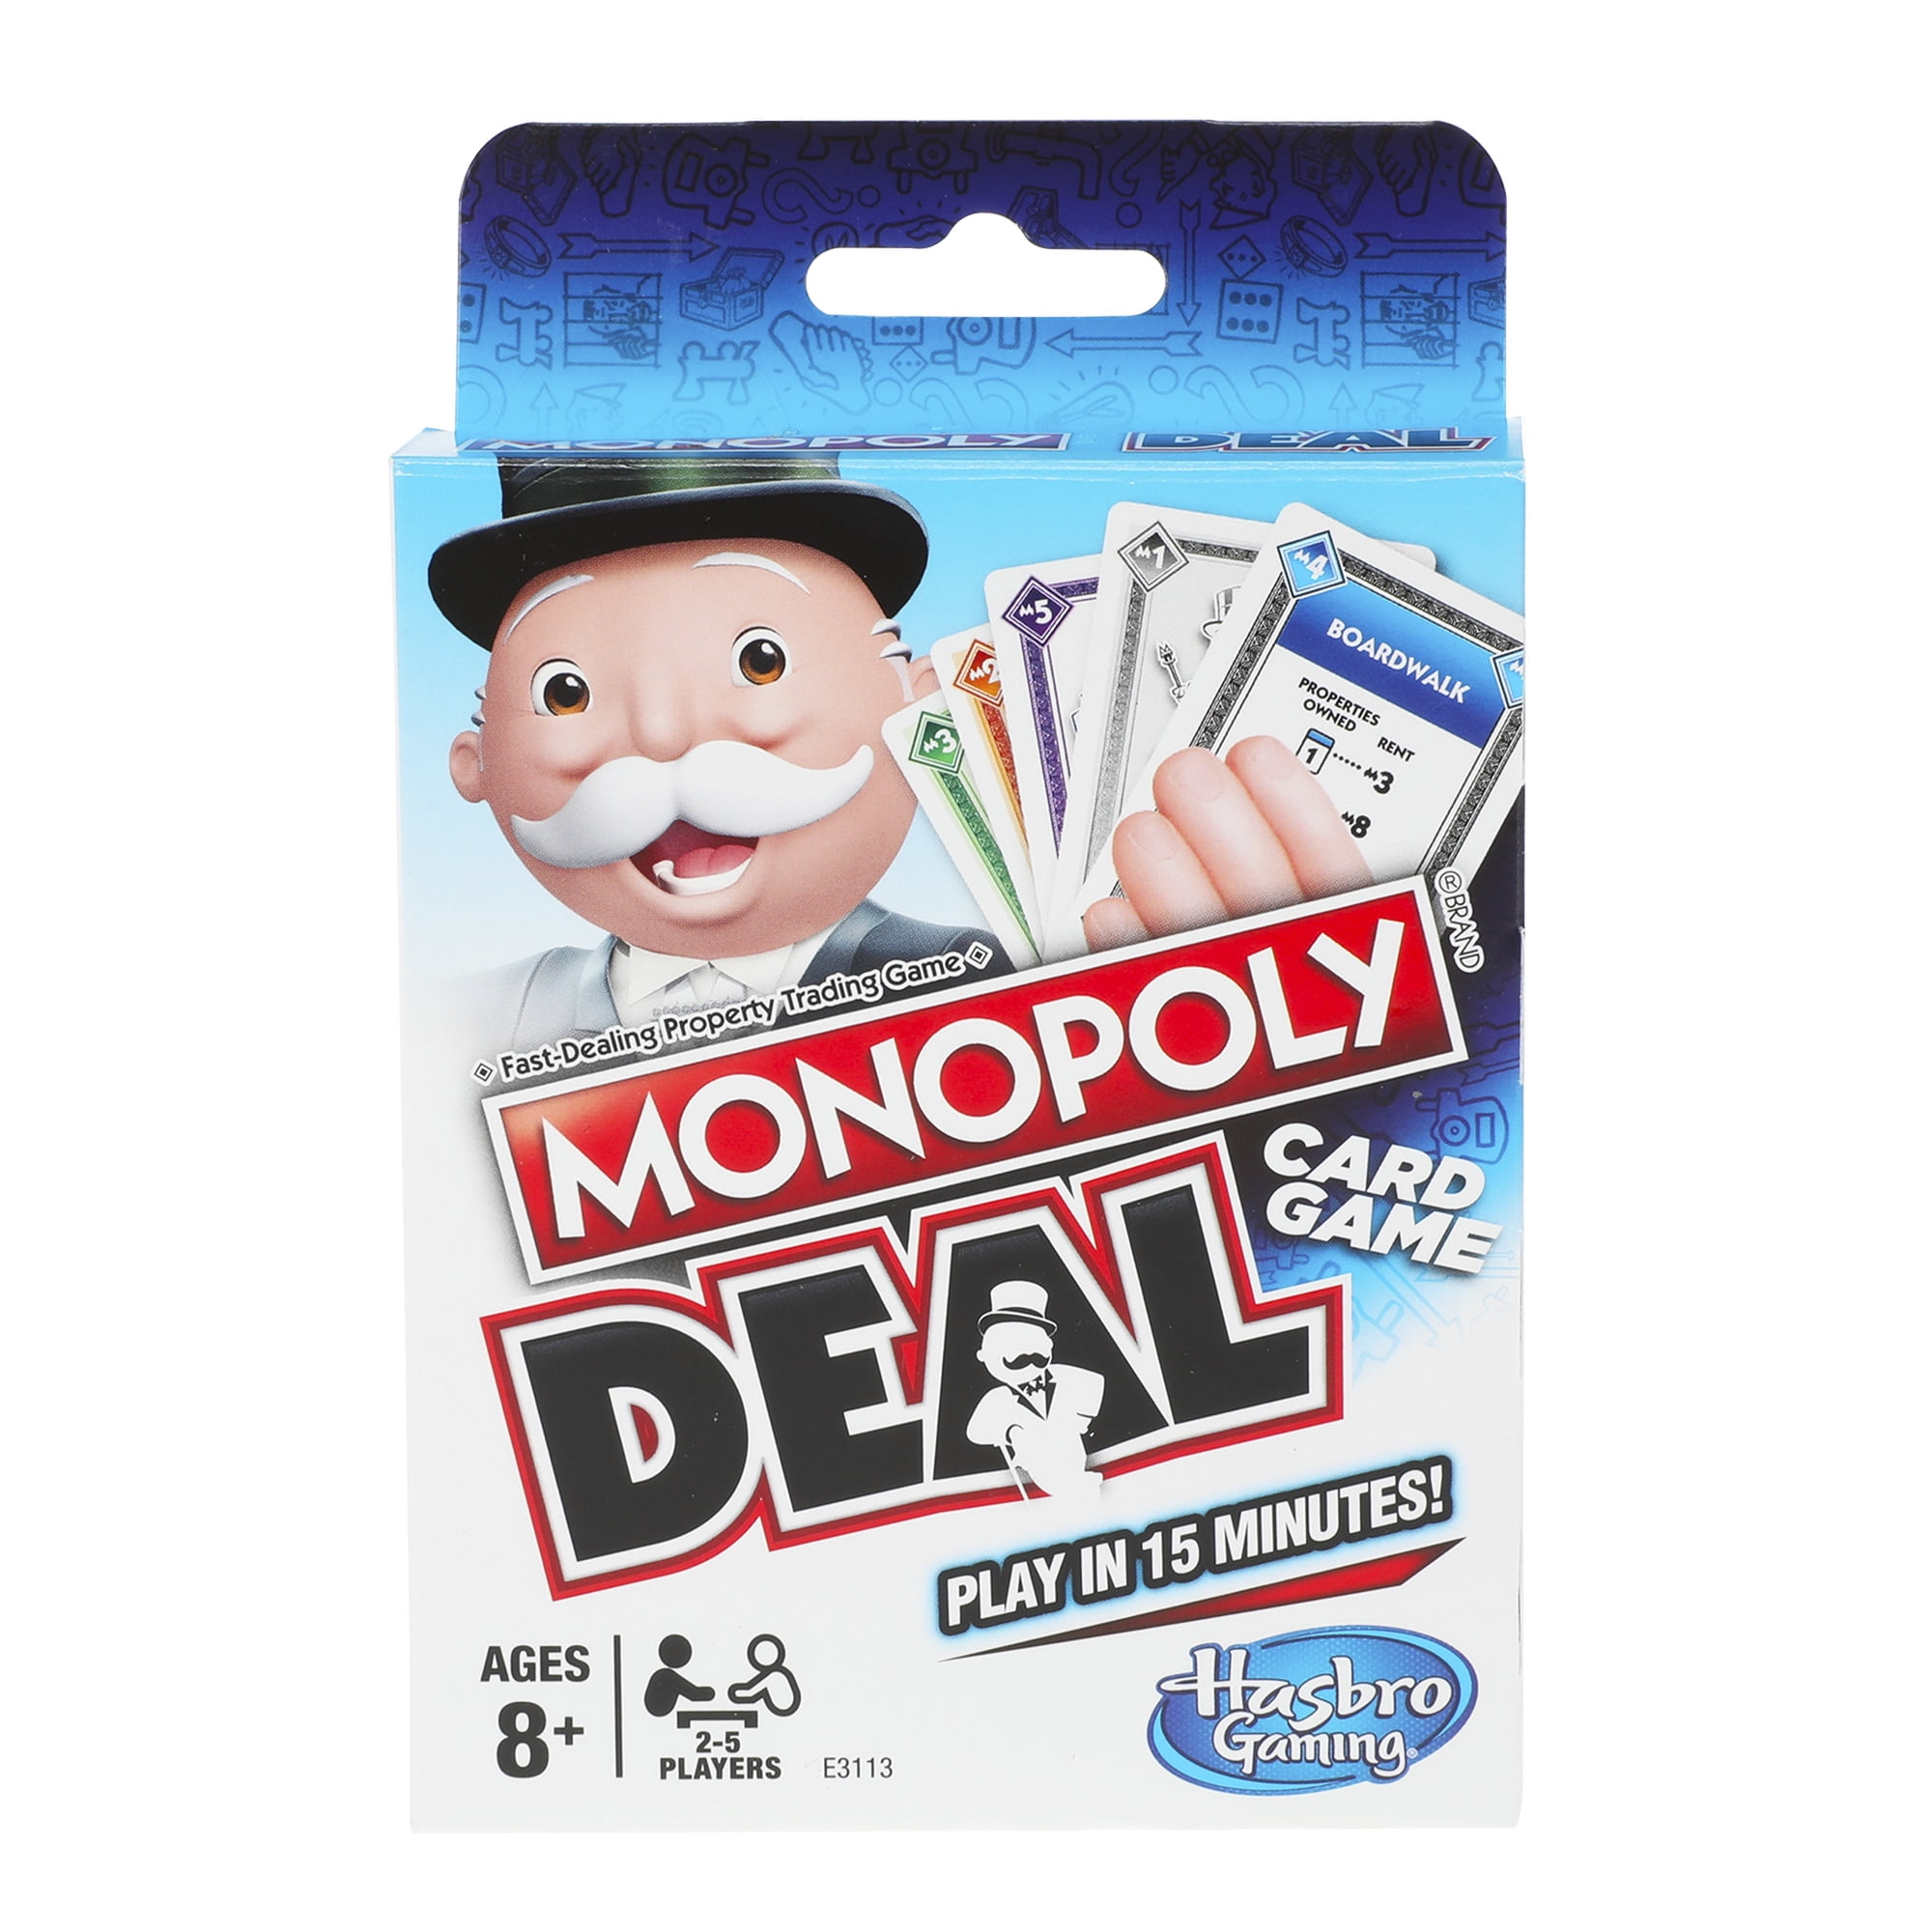 Latest Edition! Monopoly Deal Card Game Funskool 2-5 Players family indoor 